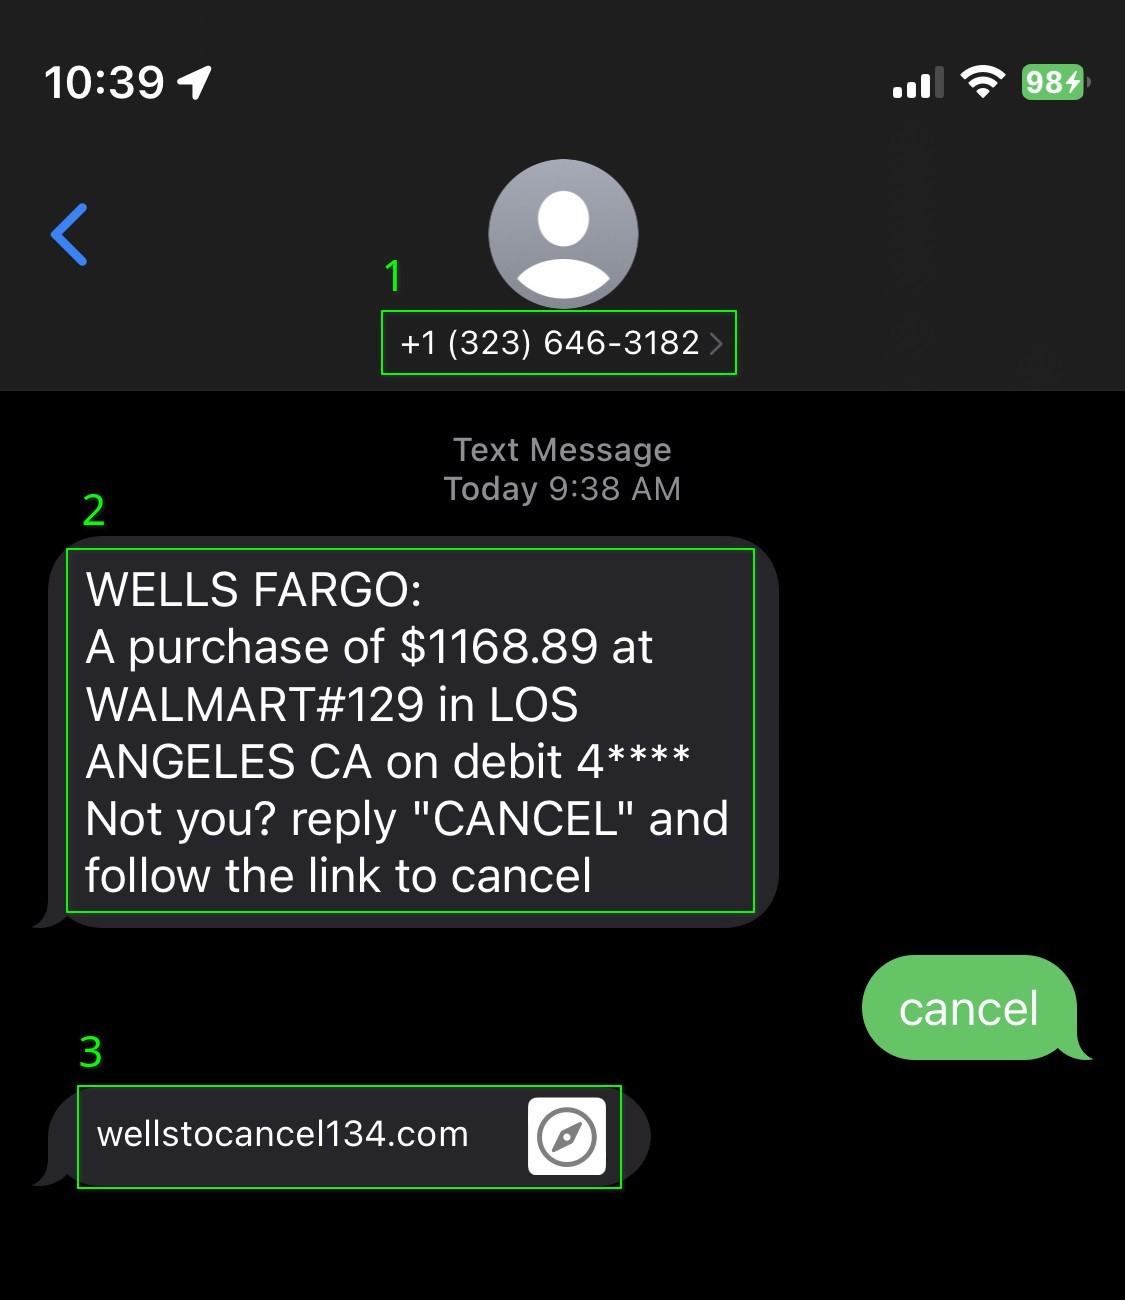 Annotated example of a banking phishing scam received via SMS text message. 